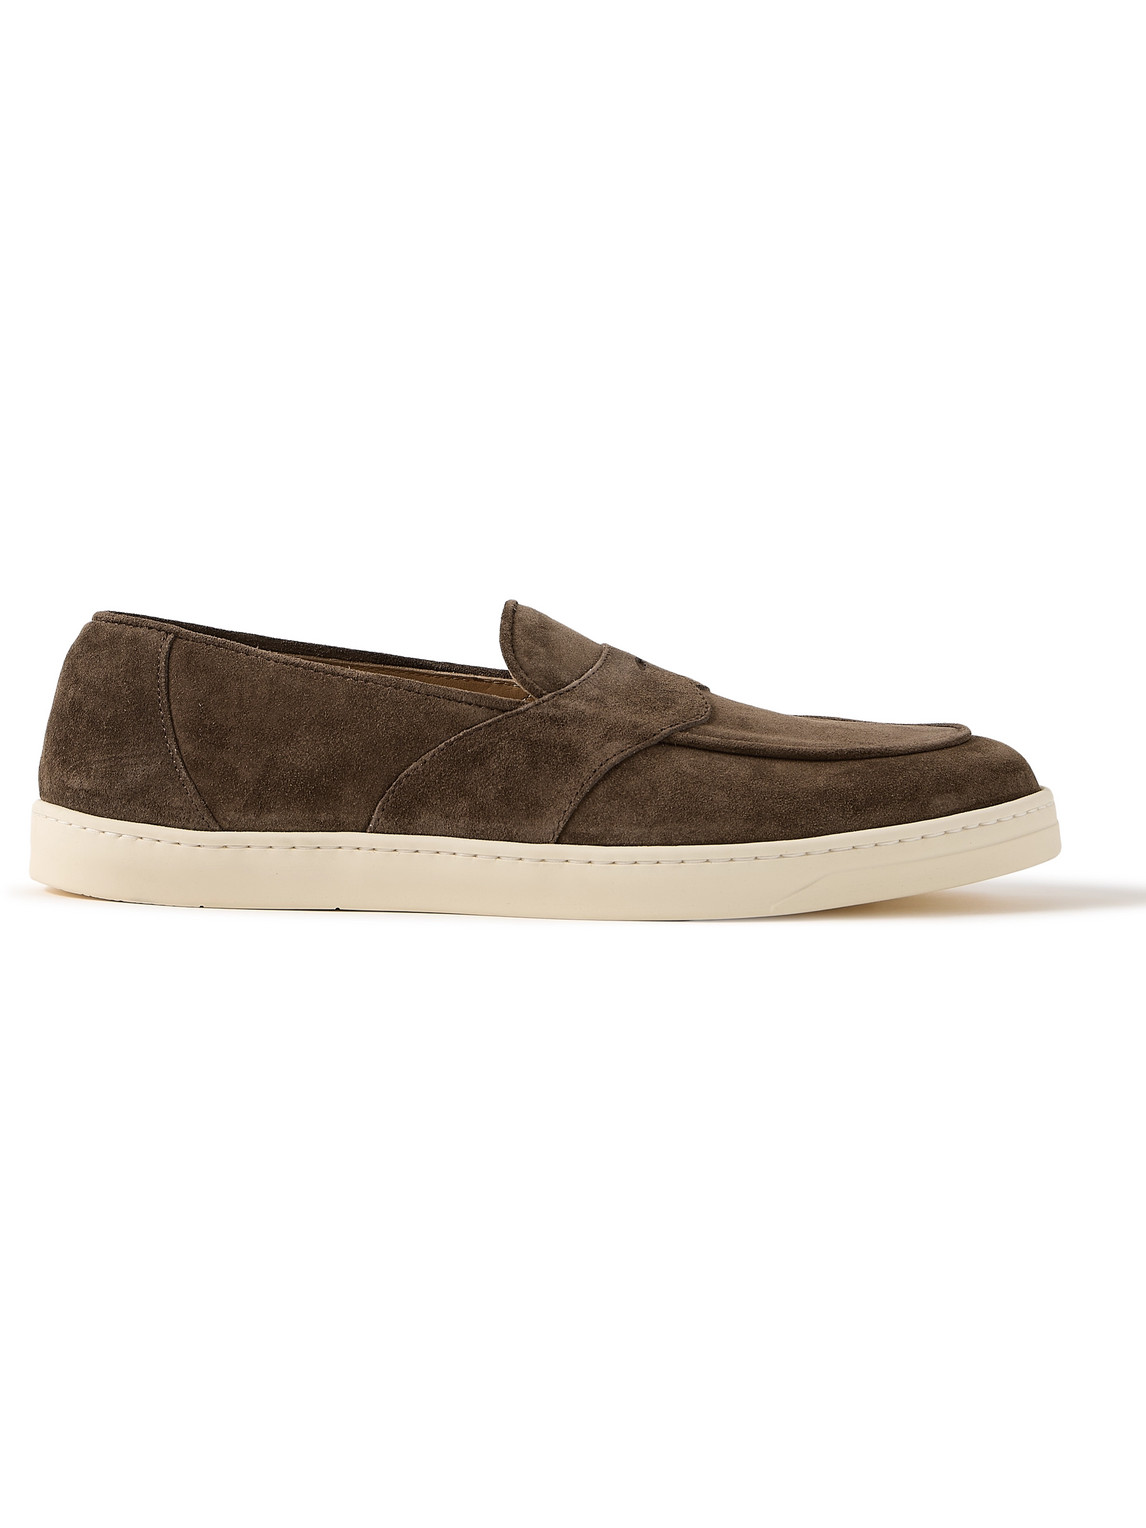 Joey Suede Penny Loafers